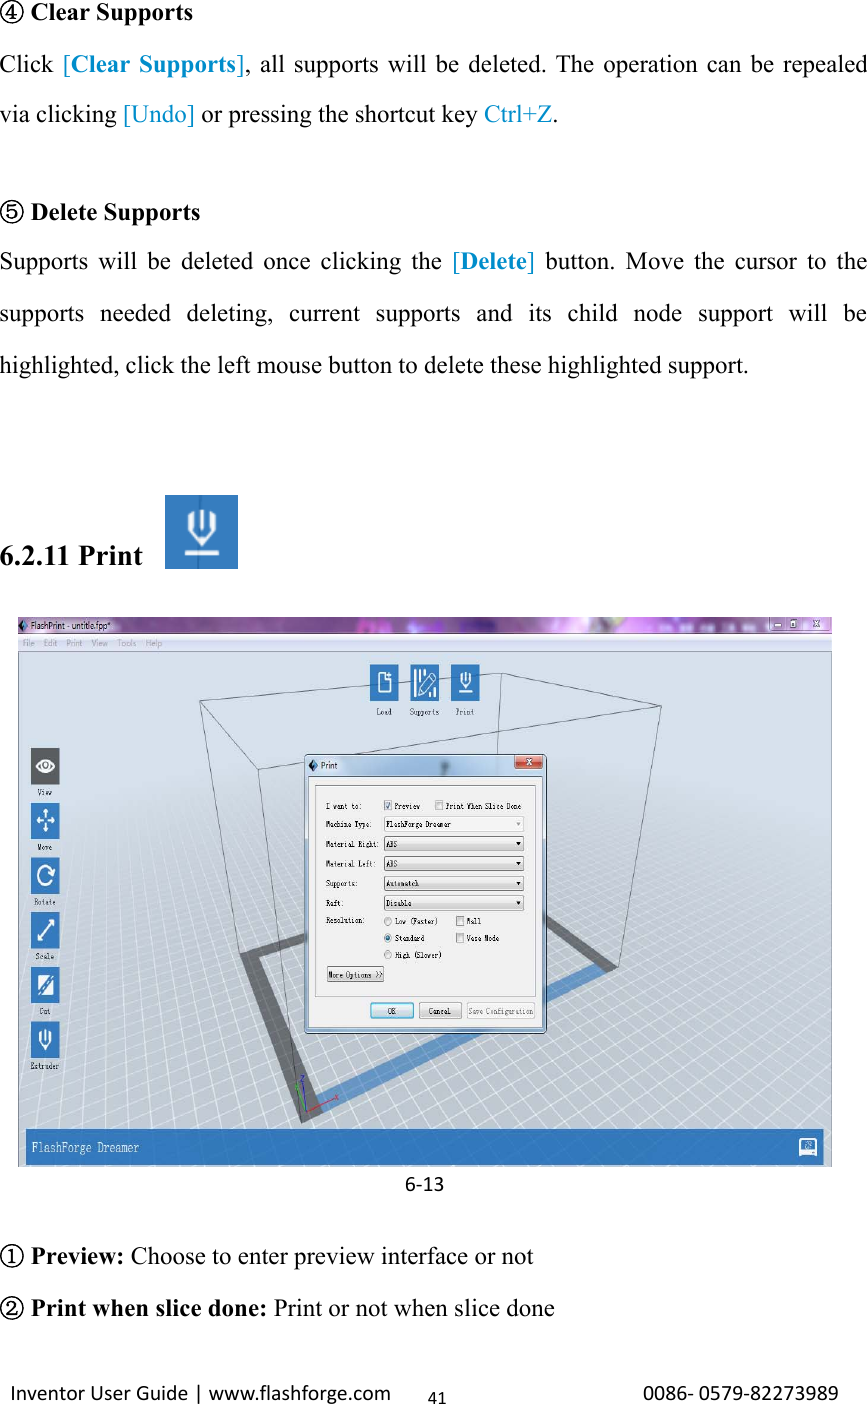 Inventor User Guide | www.flashforge.com 0086‐0579‐8227398941④Clear SupportsClick [Clear Supports], all supports will be deleted. The operation can be repealedvia clicking [Undo] or pressing the shortcut key Ctrl+Z.⑤Delete SupportsSupports will be deleted once clicking the [Delete]button. Move the cursor to thesupports needed deleting, current supports and its child node support will behighlighted, click the left mouse button to delete these highlighted support.6.2.11 Print①Preview: Choose to enter preview interface or not②Print when slice done: Print or not when slice done6‐13